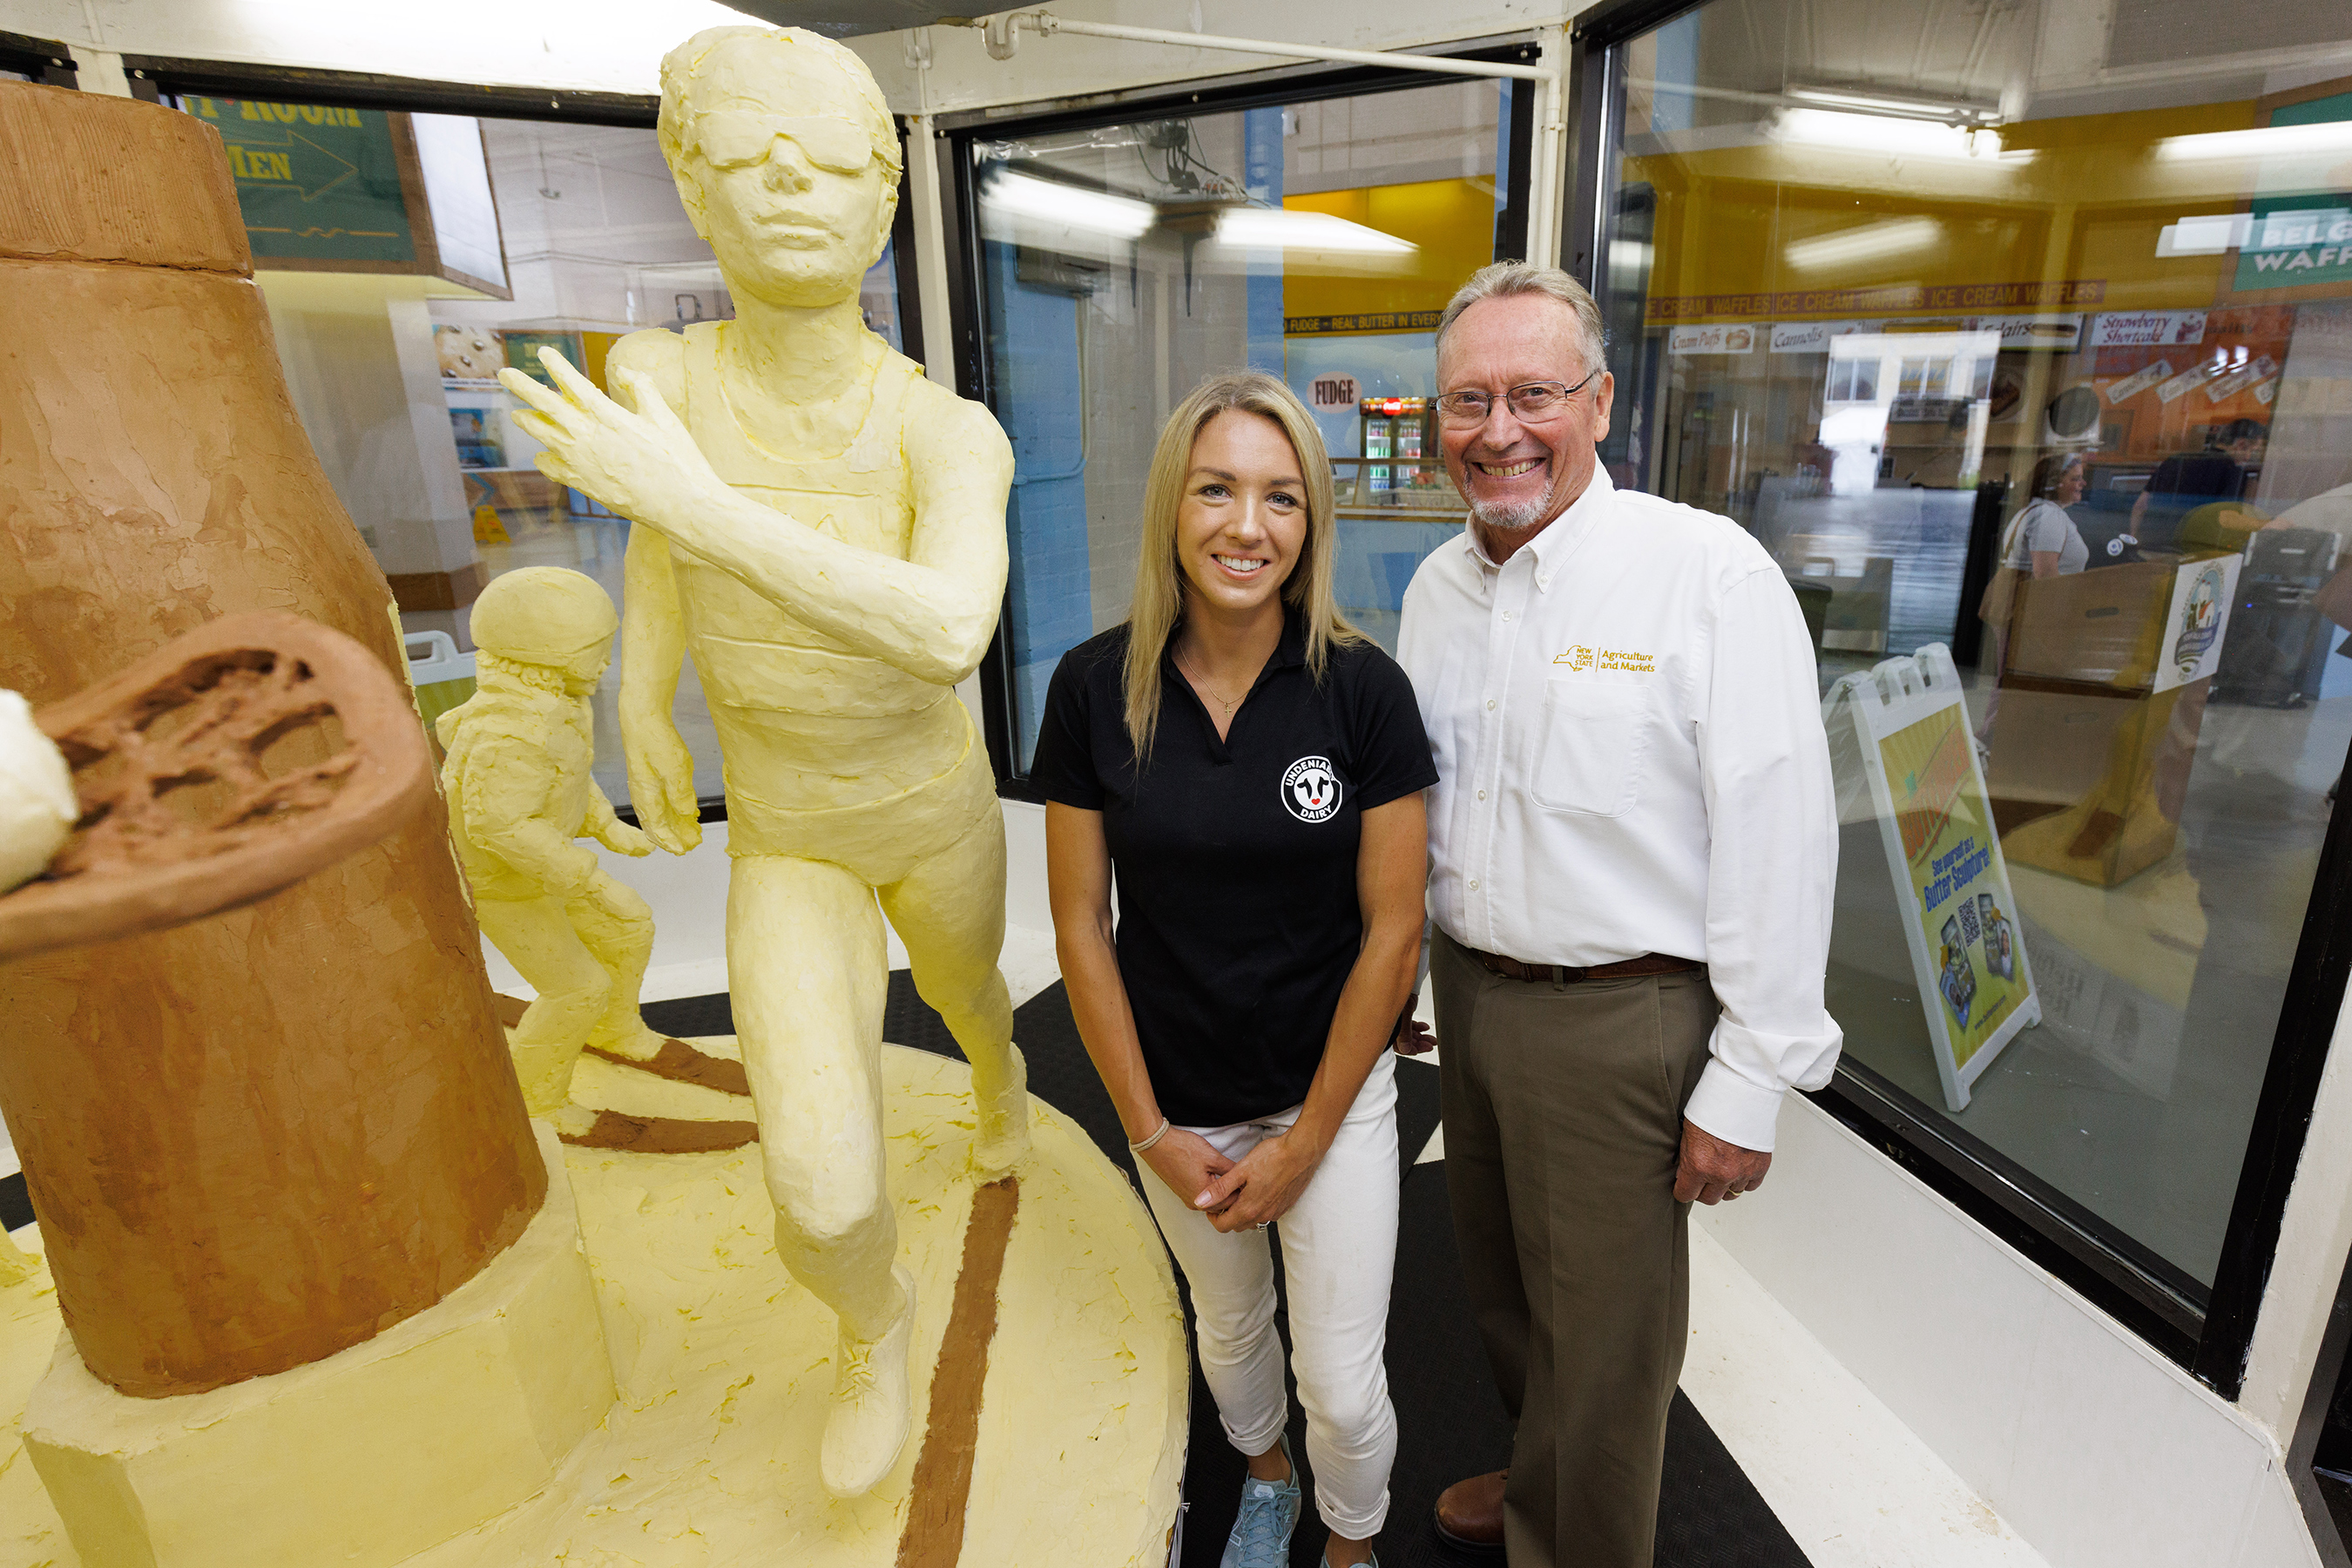 American Dairy Association North East unveiled the 54th Annual Butter Sculpture at the New York State Fair on August 23, 2022, titled Refuel Her Greatness – Celebrating the 50th Anniversary of Title IX. Participating in the unveiling were U.S. Olympian, professional runner, and dairy farmer Elle St. Pierre (left) and New York State Department of Agriculture and Markets Commissioner Richard A. Ball.